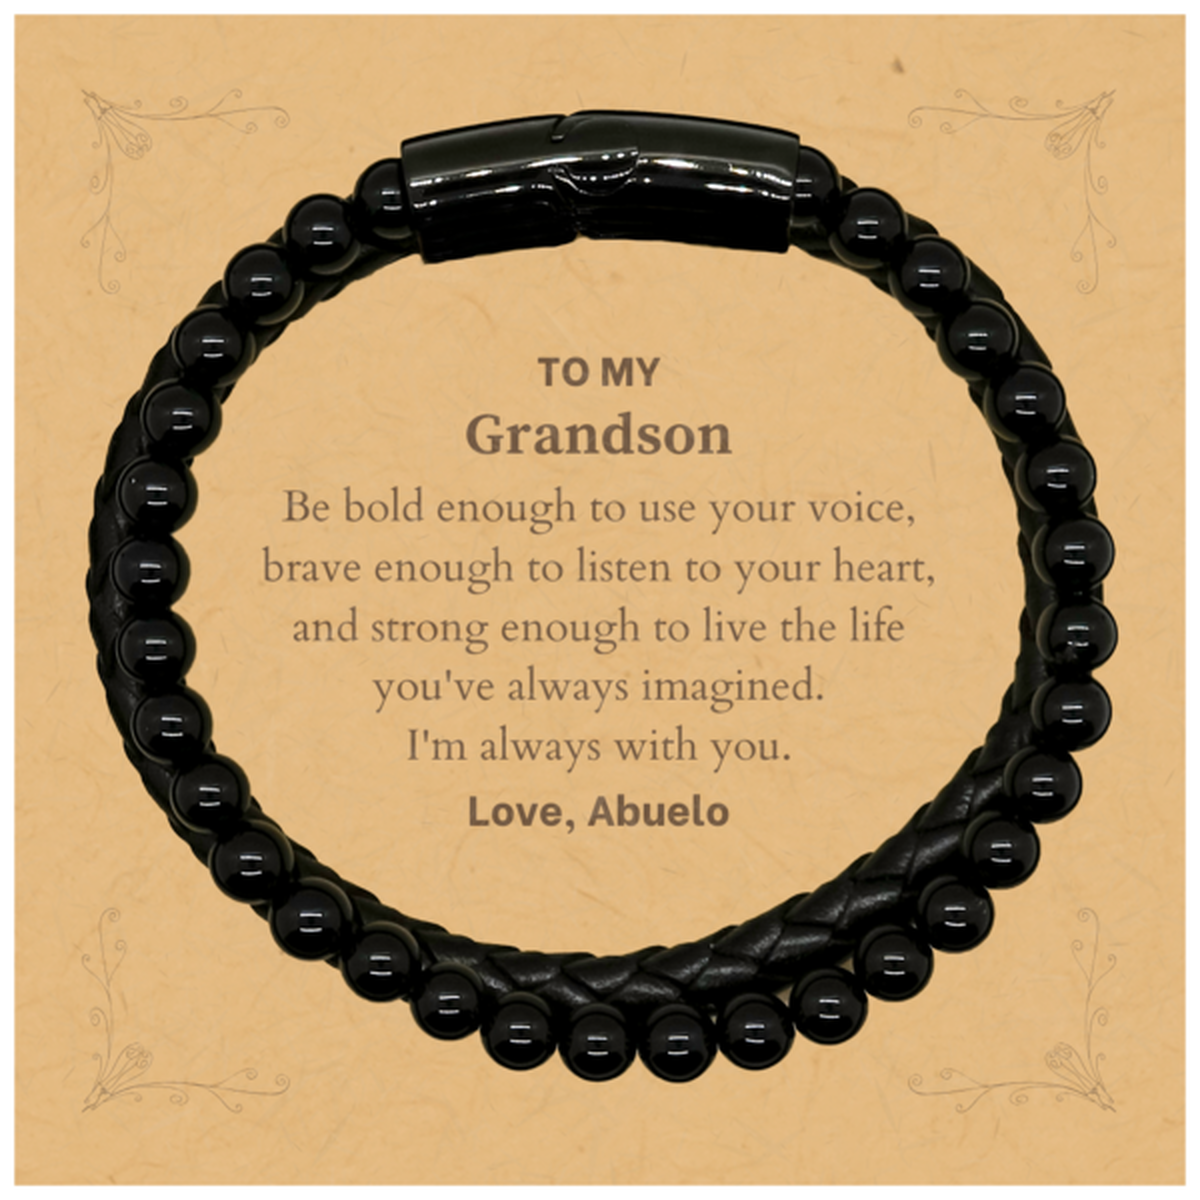 Keepsake Grandson Stone Leather Bracelets Gift Idea Graduation Christmas Birthday Grandson from Abuelo, Grandson Be bold enough to use your voice, brave enough to listen to your heart. Love, Abuelo